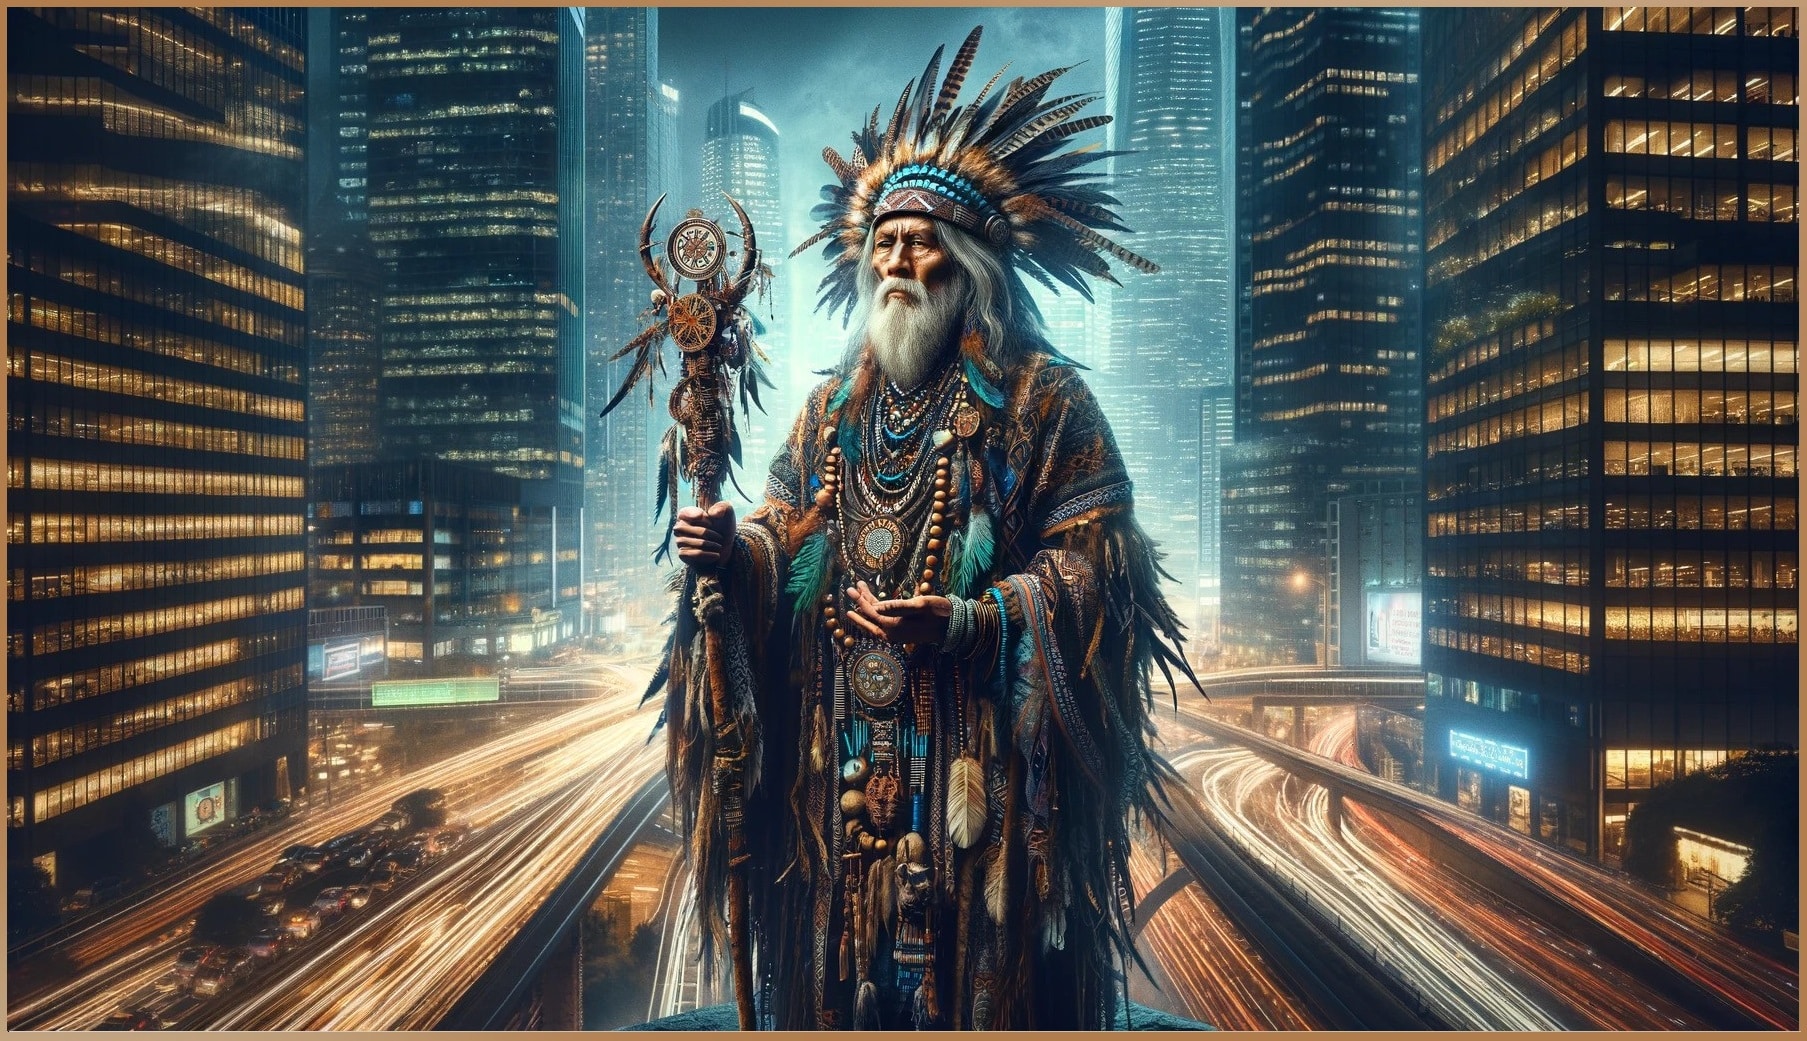 A shaman wizard with intricate attire and emblematic staff stands amidst the fast-paced life of a modern city, symbolizing the enduring presence and relevance of psychic powers and ancient spirituality in today's society.